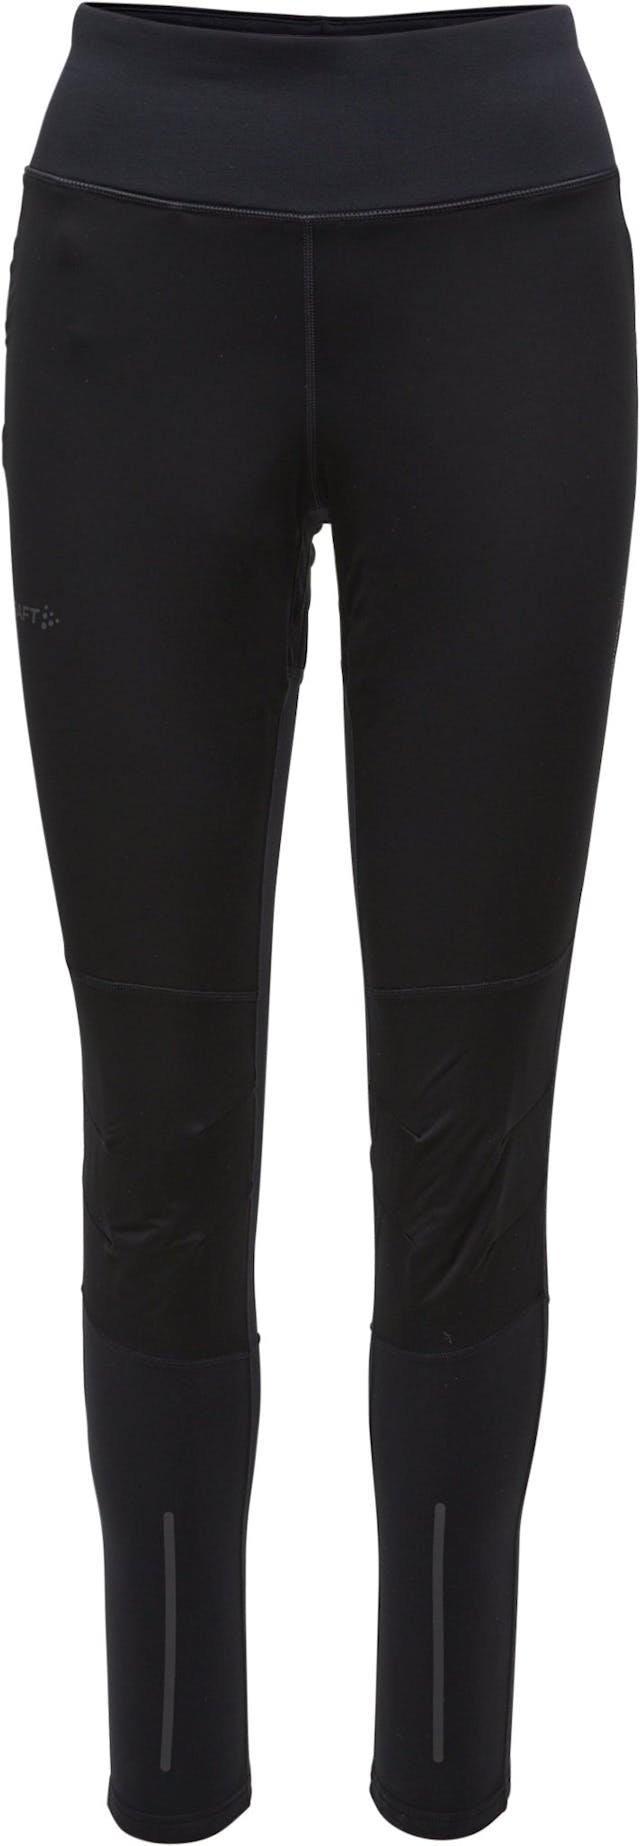 Product image for ADV Essence Wind Tights - Women's